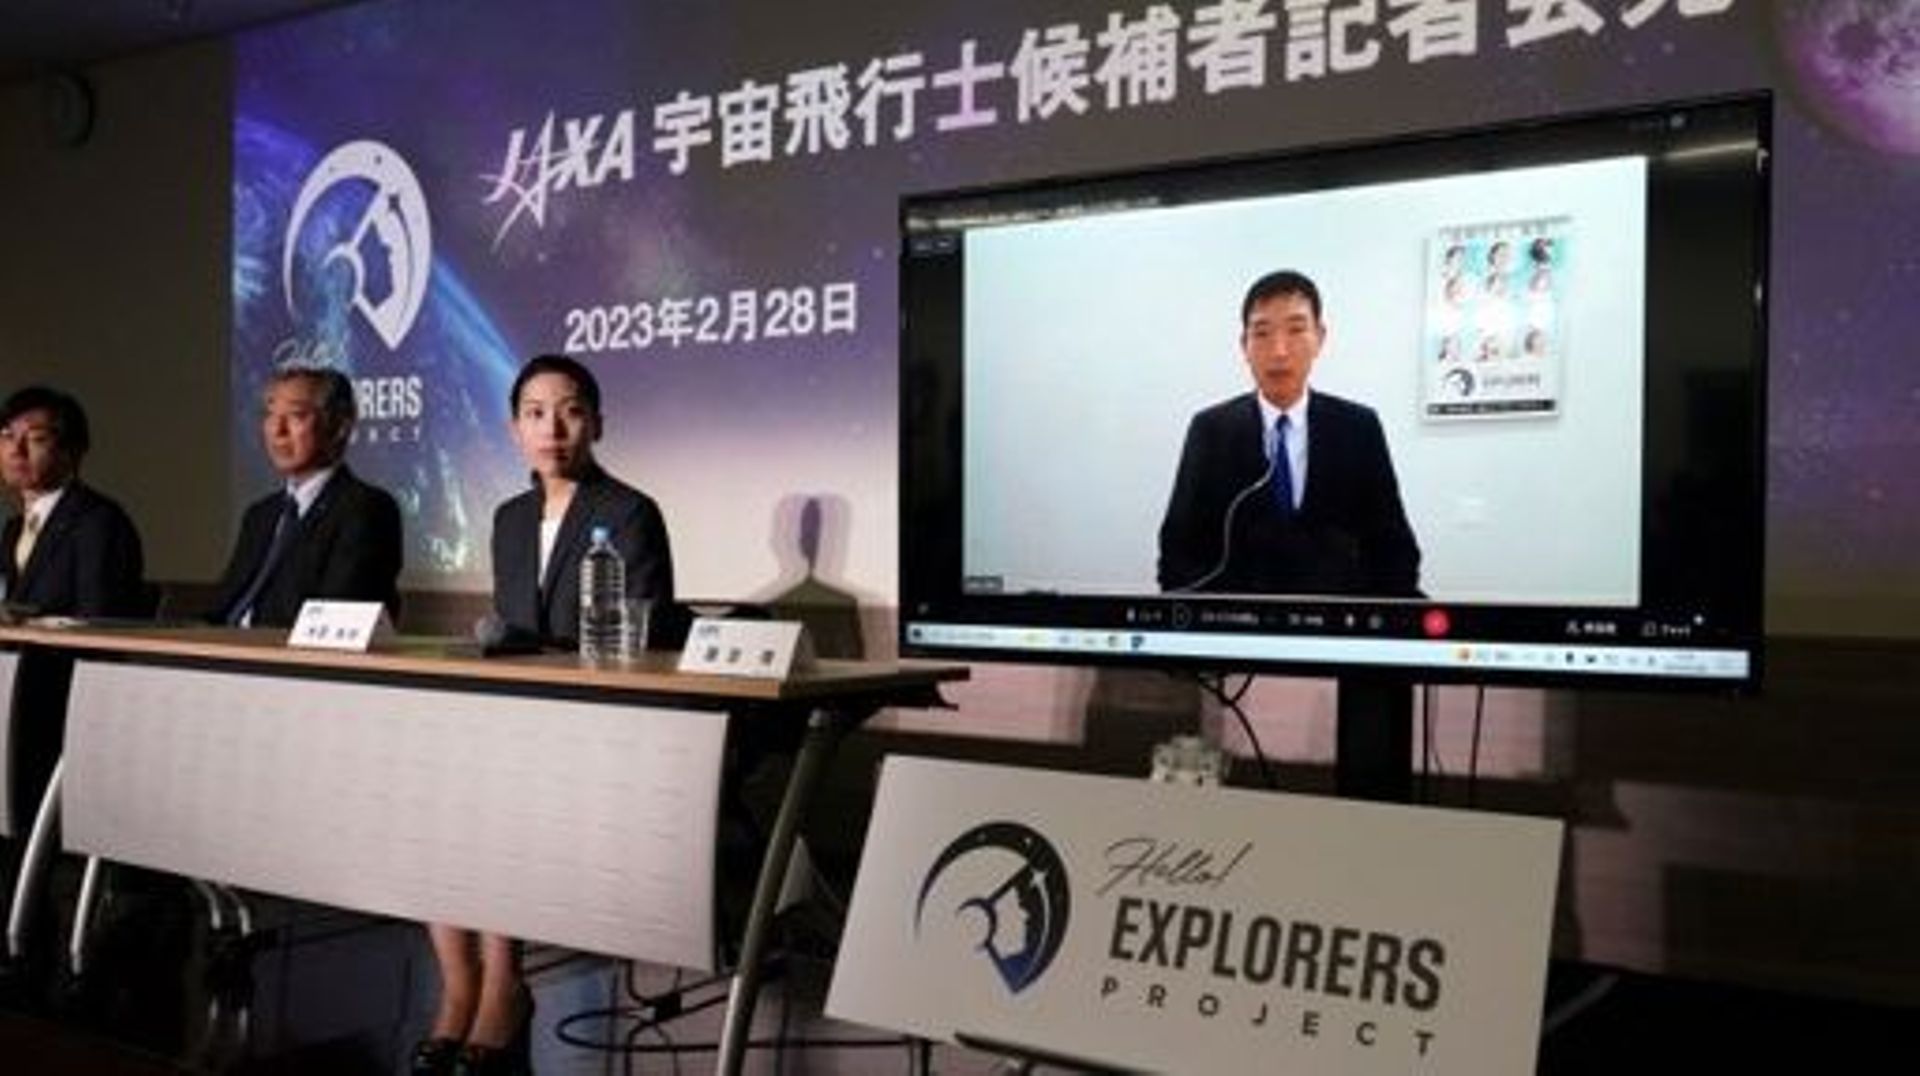 Astronaut candidates for the Japan Aerospace Exploration Agency (JAXA), Ayu Yoneda (3rd L), a surgeon at the Japanese Red Cross Medical Center, and Makoto Suwa (on screen), a disaster prevention specialist at the World Bank, attend a press conference in T